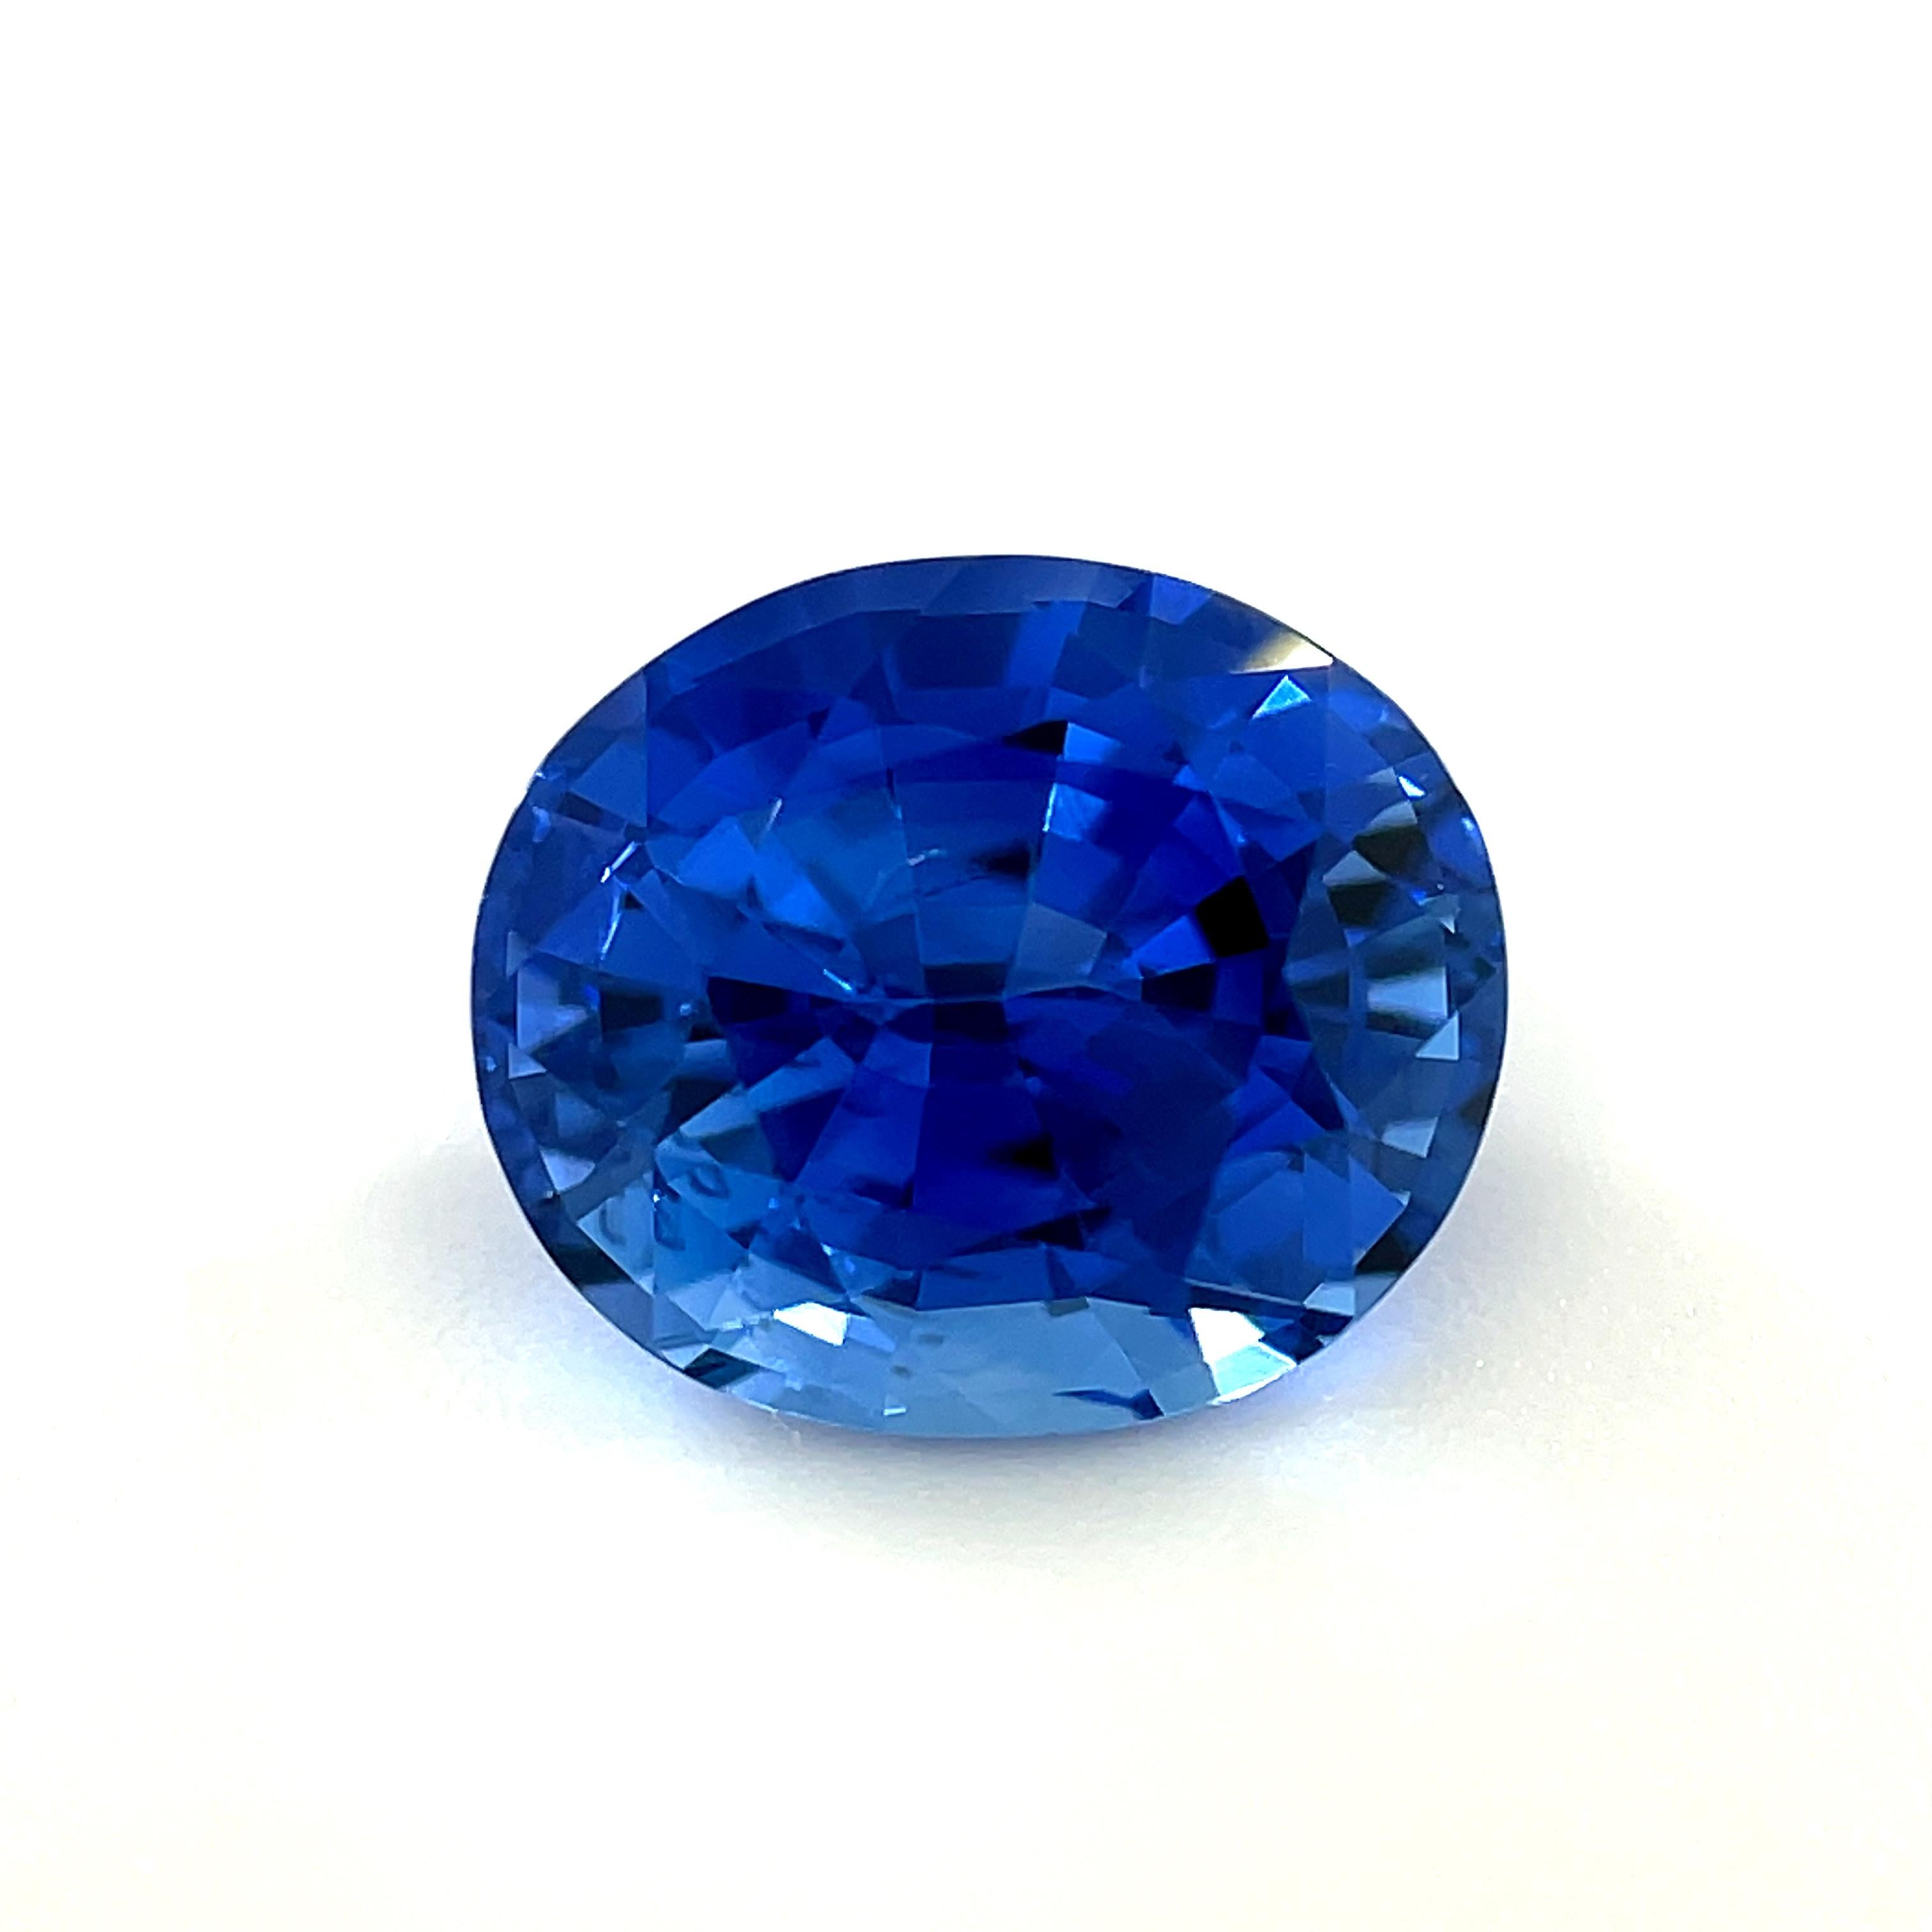 where to sell gemstones in melbourne